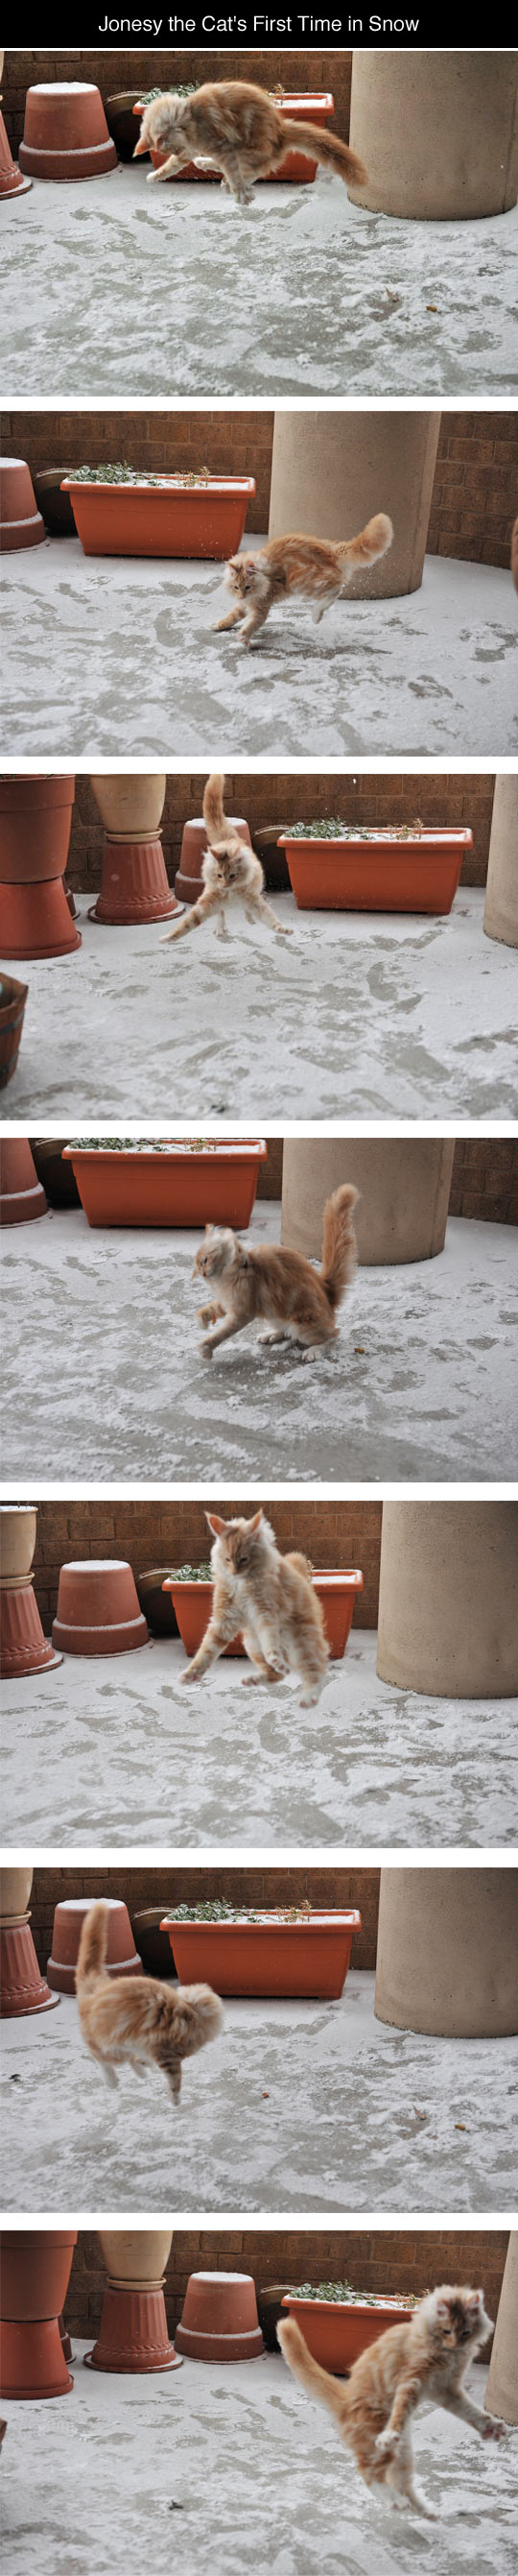 funny-cat-snow-first-time